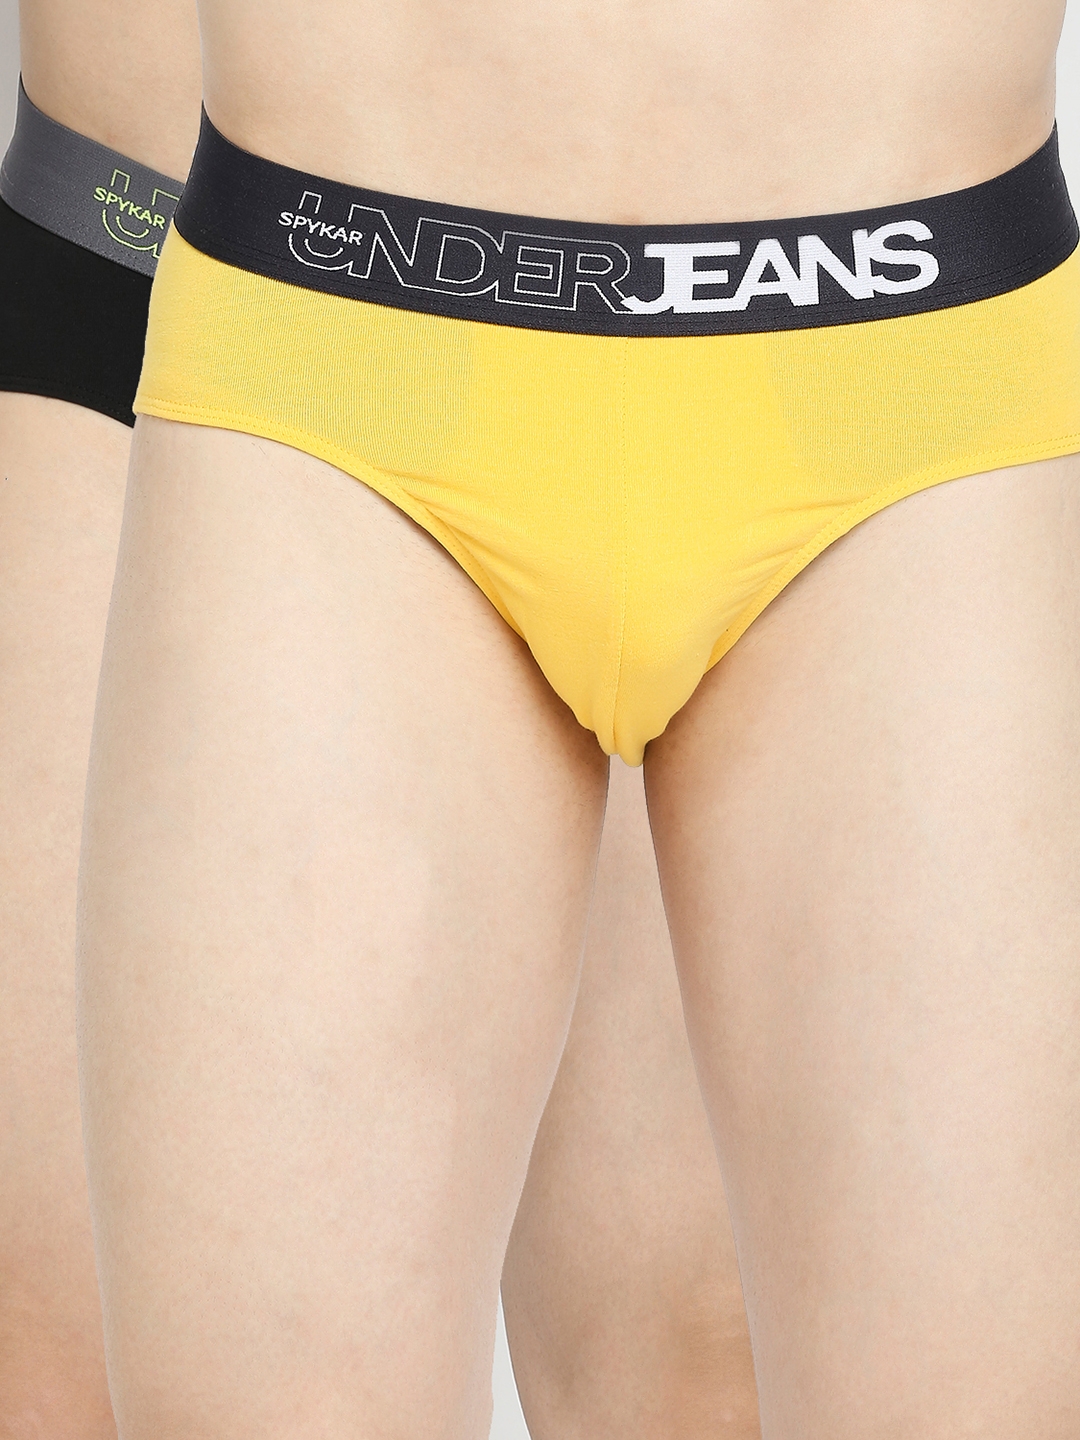 Underjeans by Spykar Yellow & Black Cotton Blend Brief - Pack Of 2